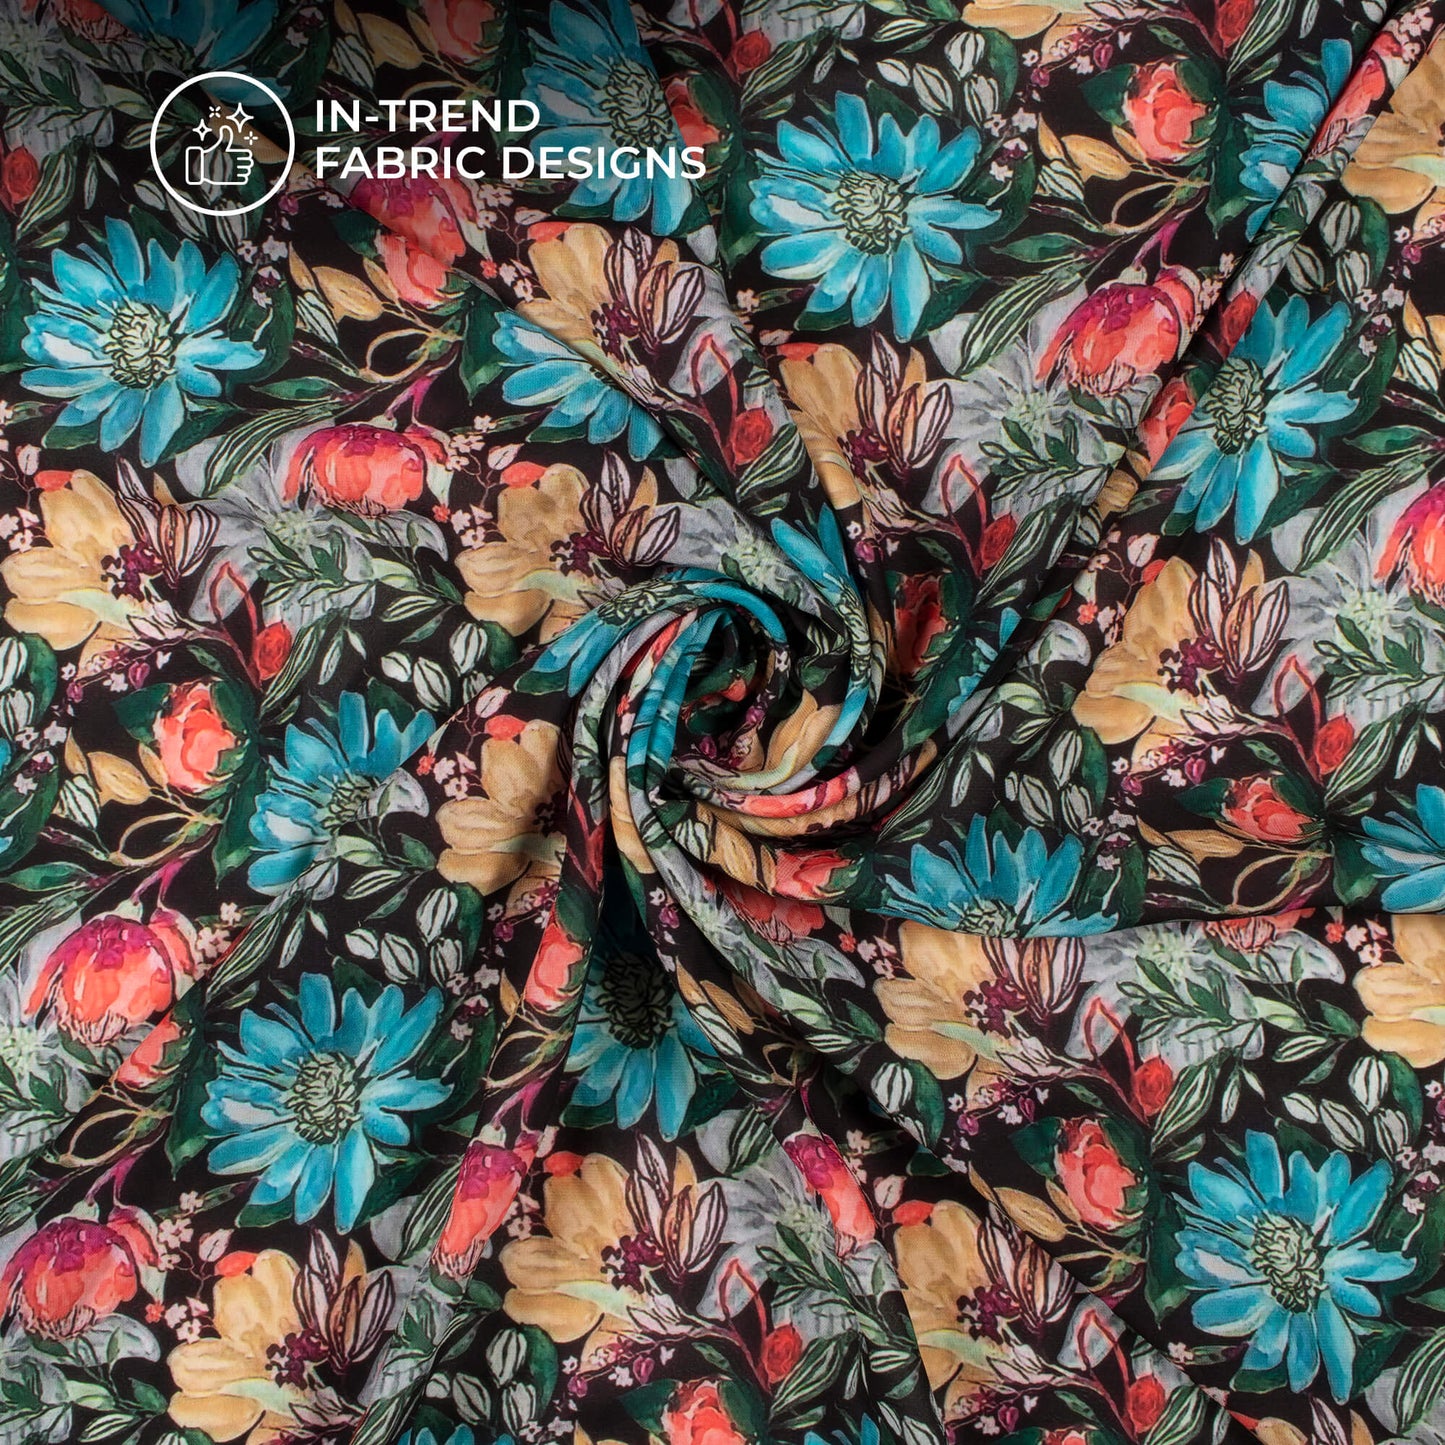 Sniffy Floral Digital Print BSY Crepe Fabric